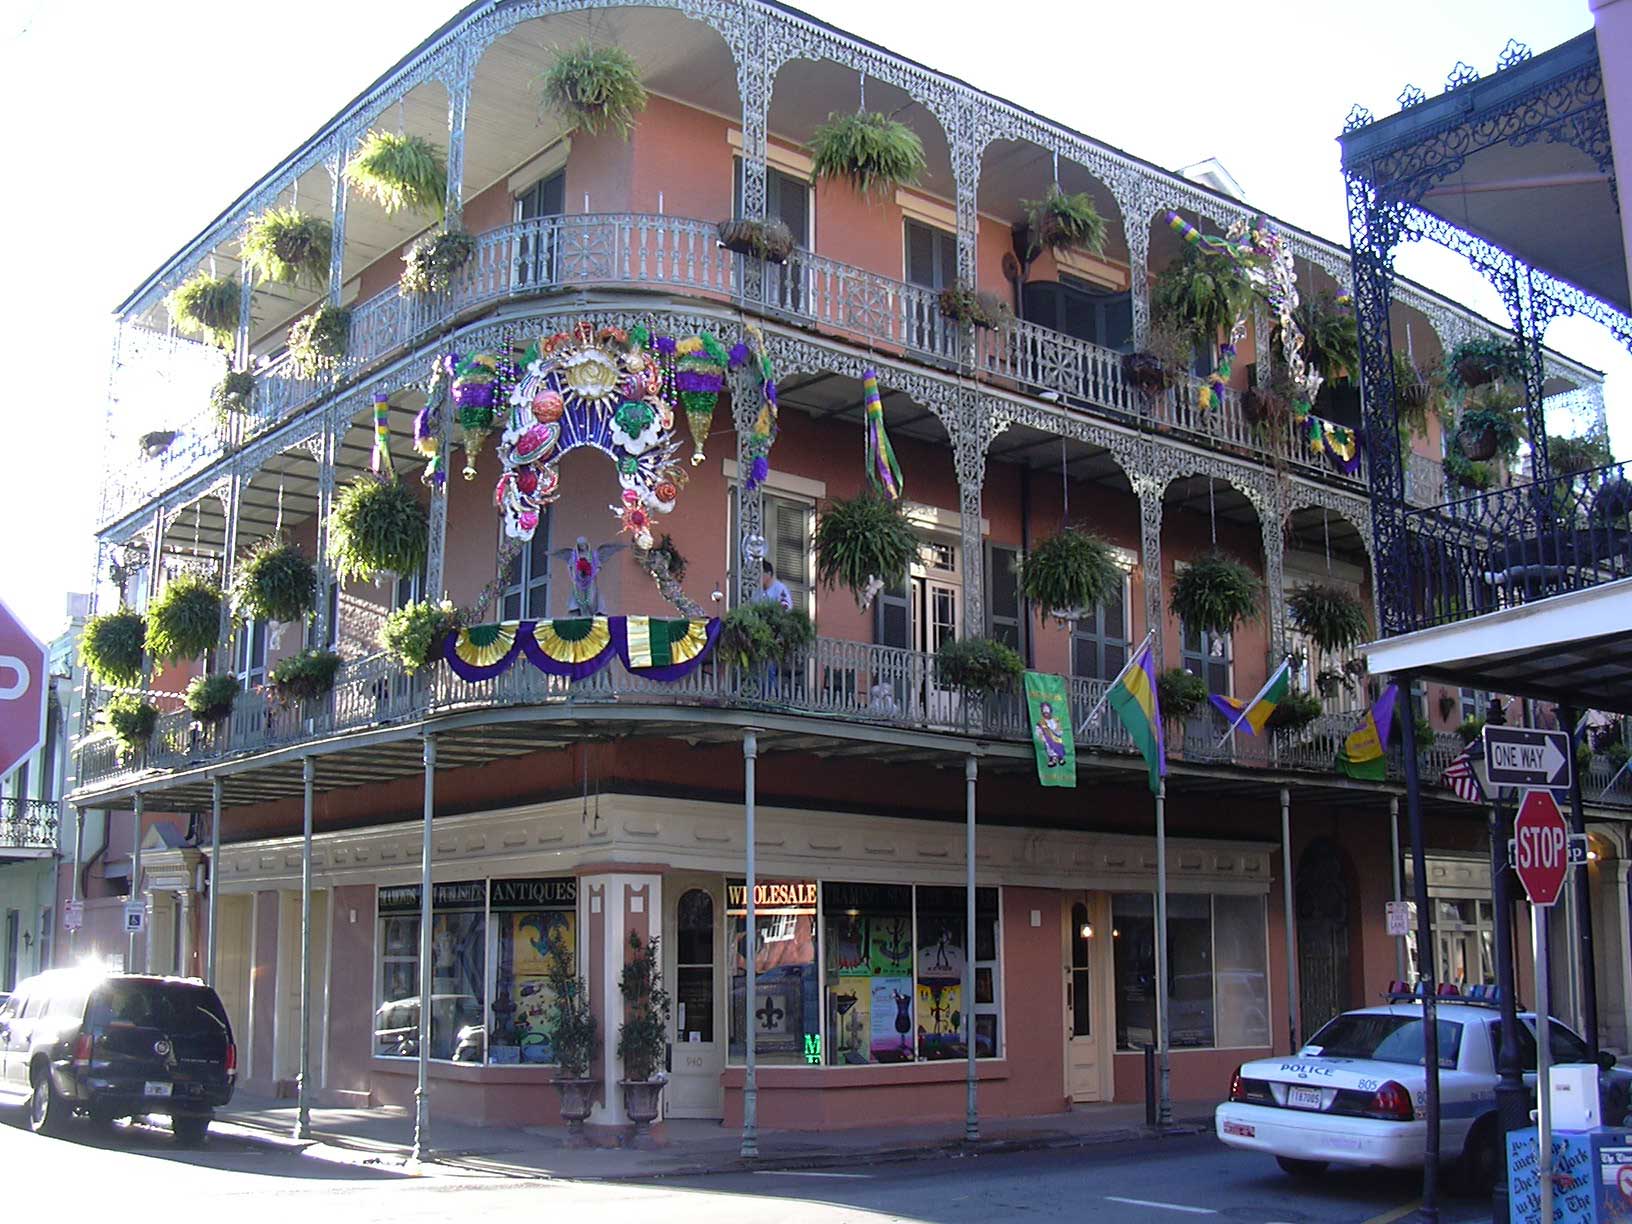 Photograph of Bourbon Street in New Orleans, Louisiana.